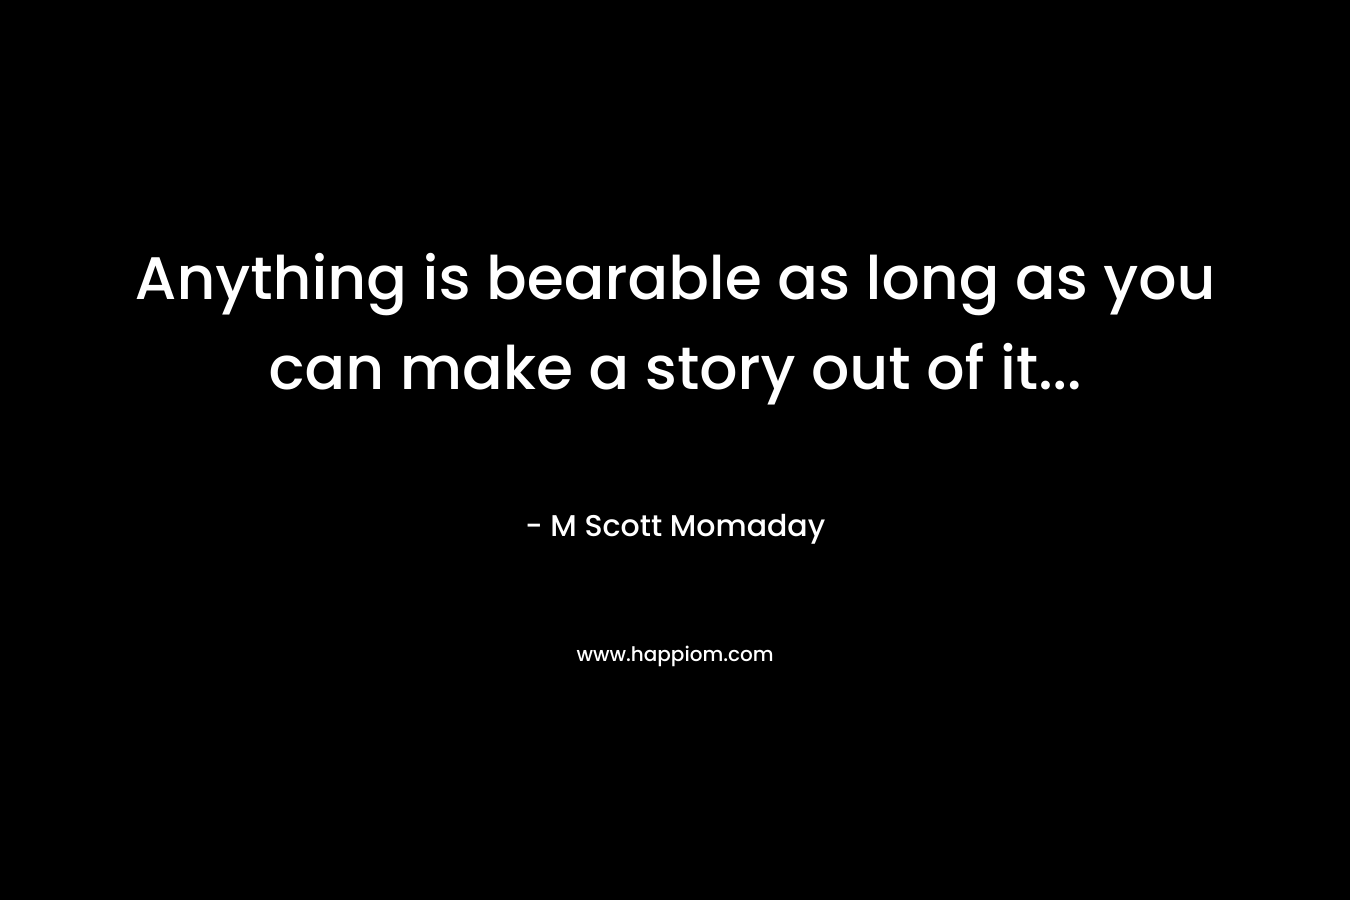 Anything is bearable as long as you can make a story out of it...